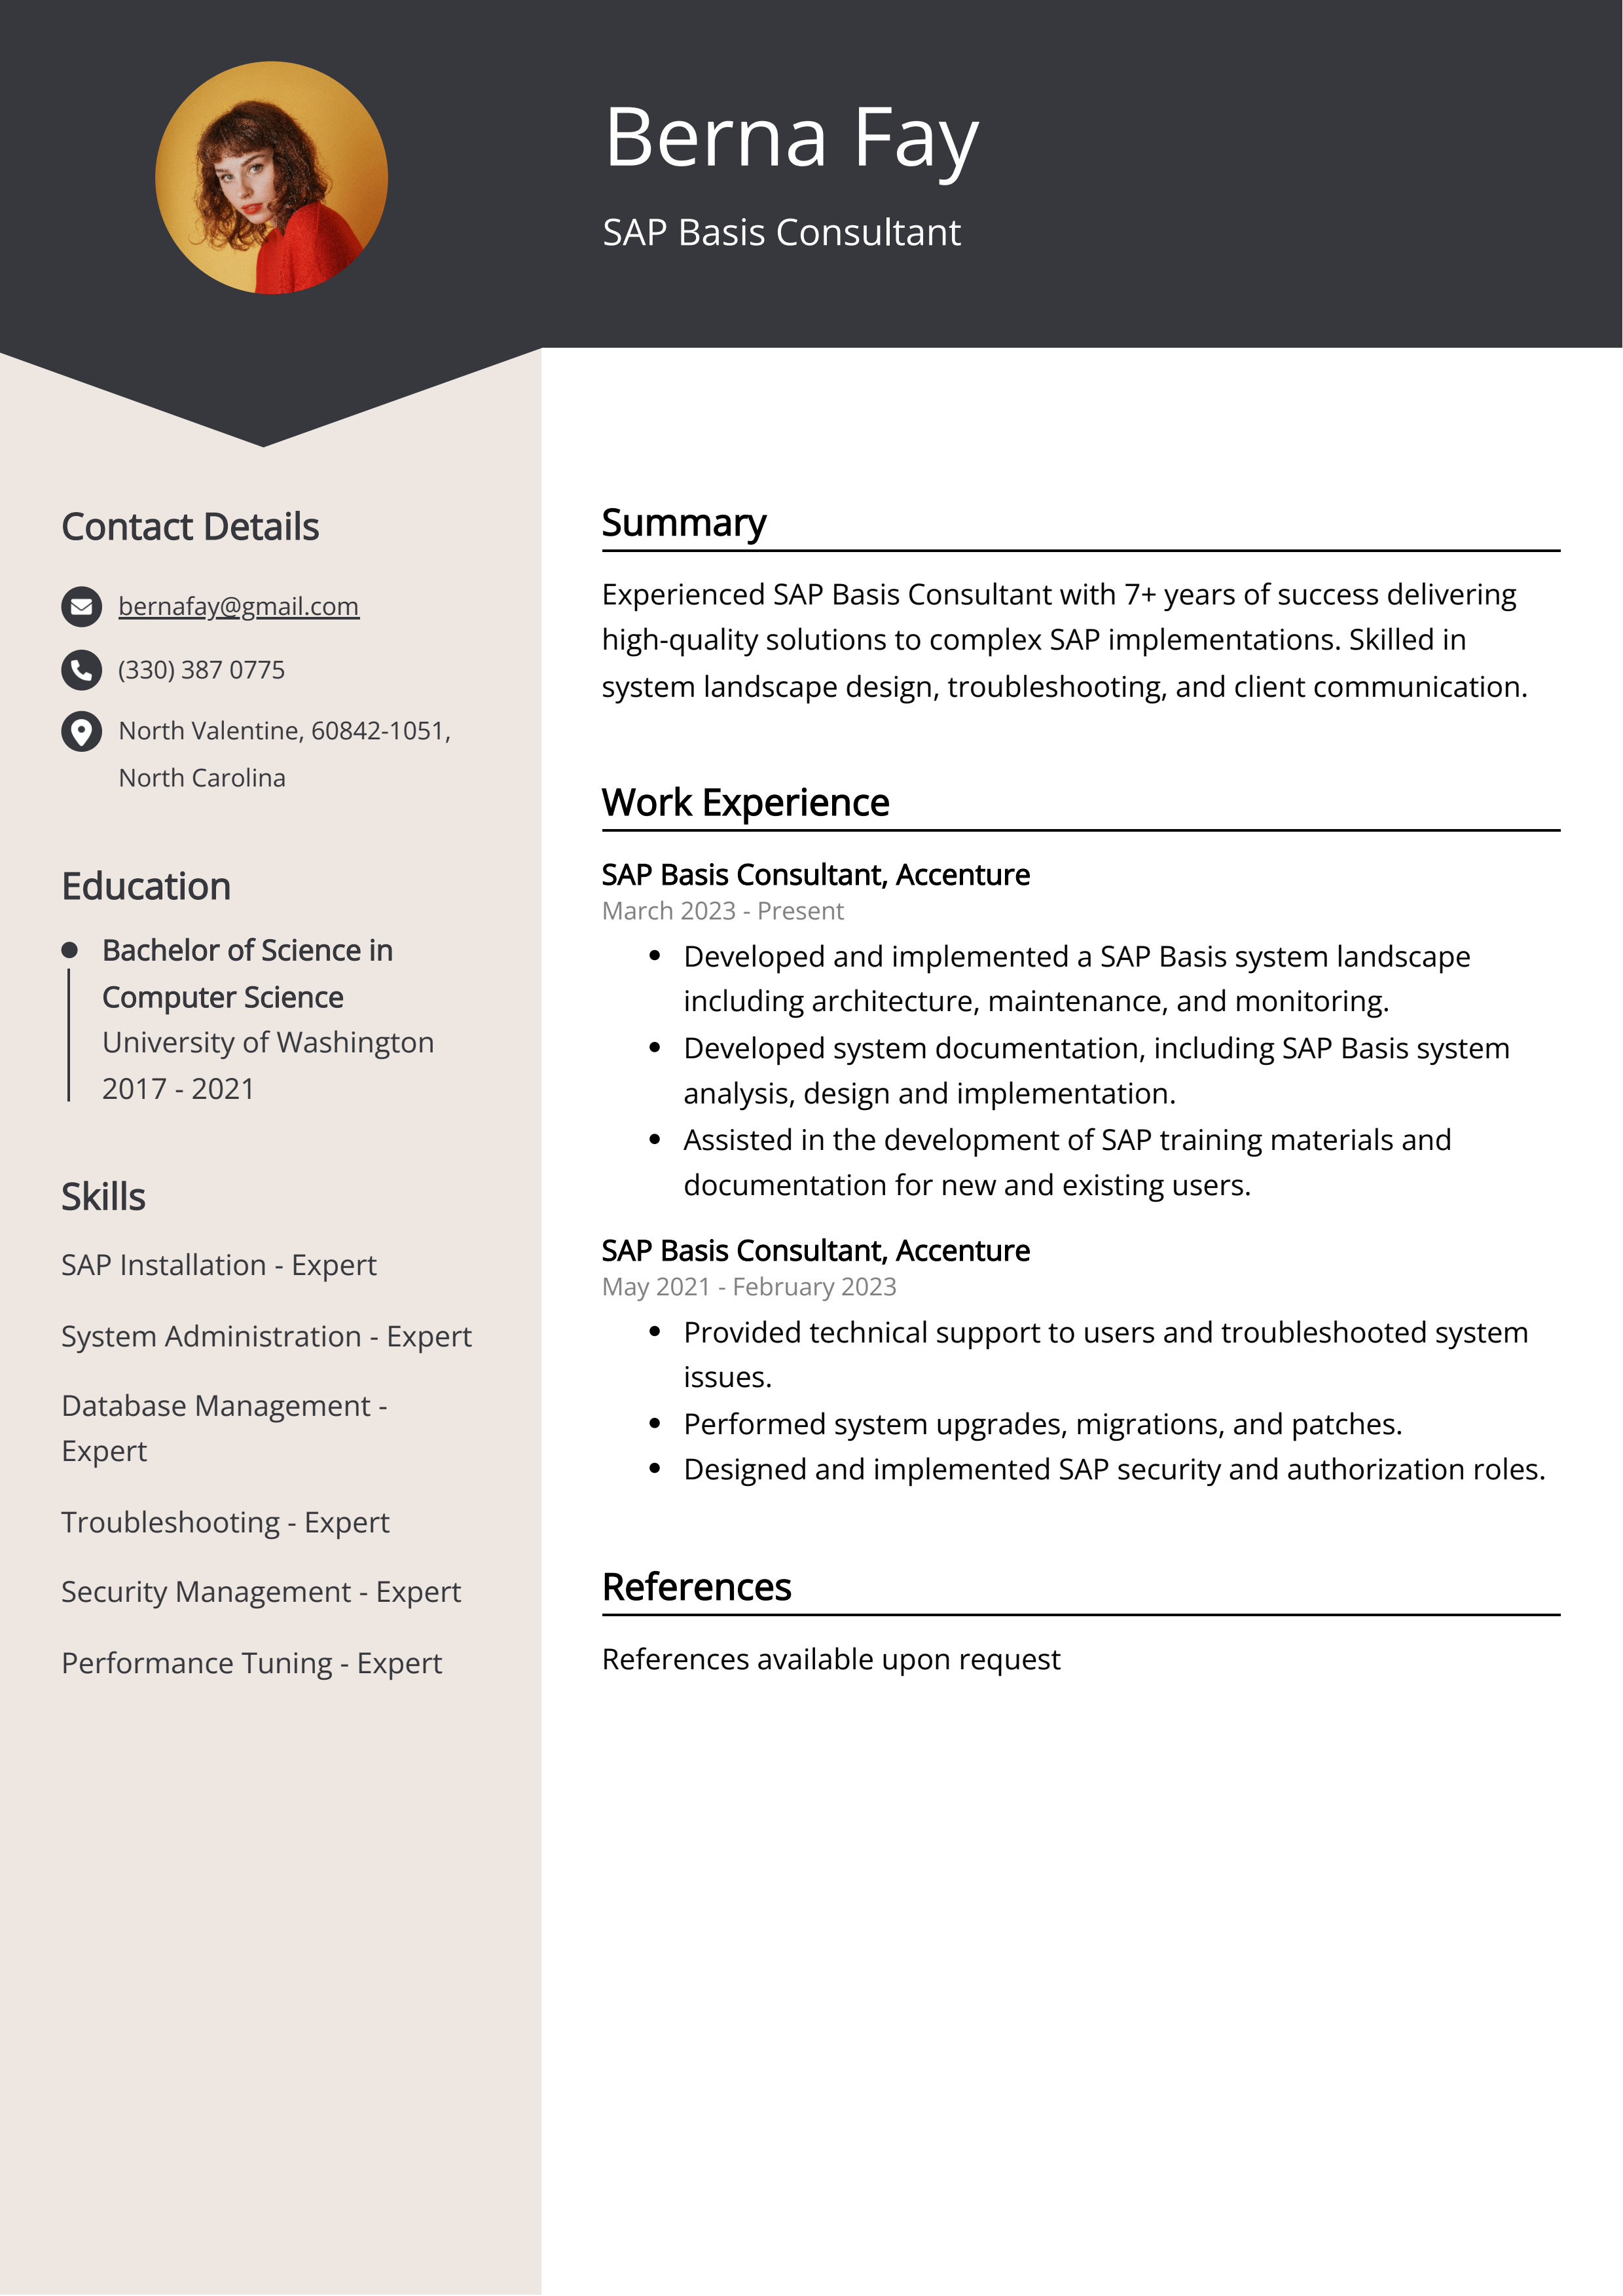 SAP Basis Consultant Resume Example